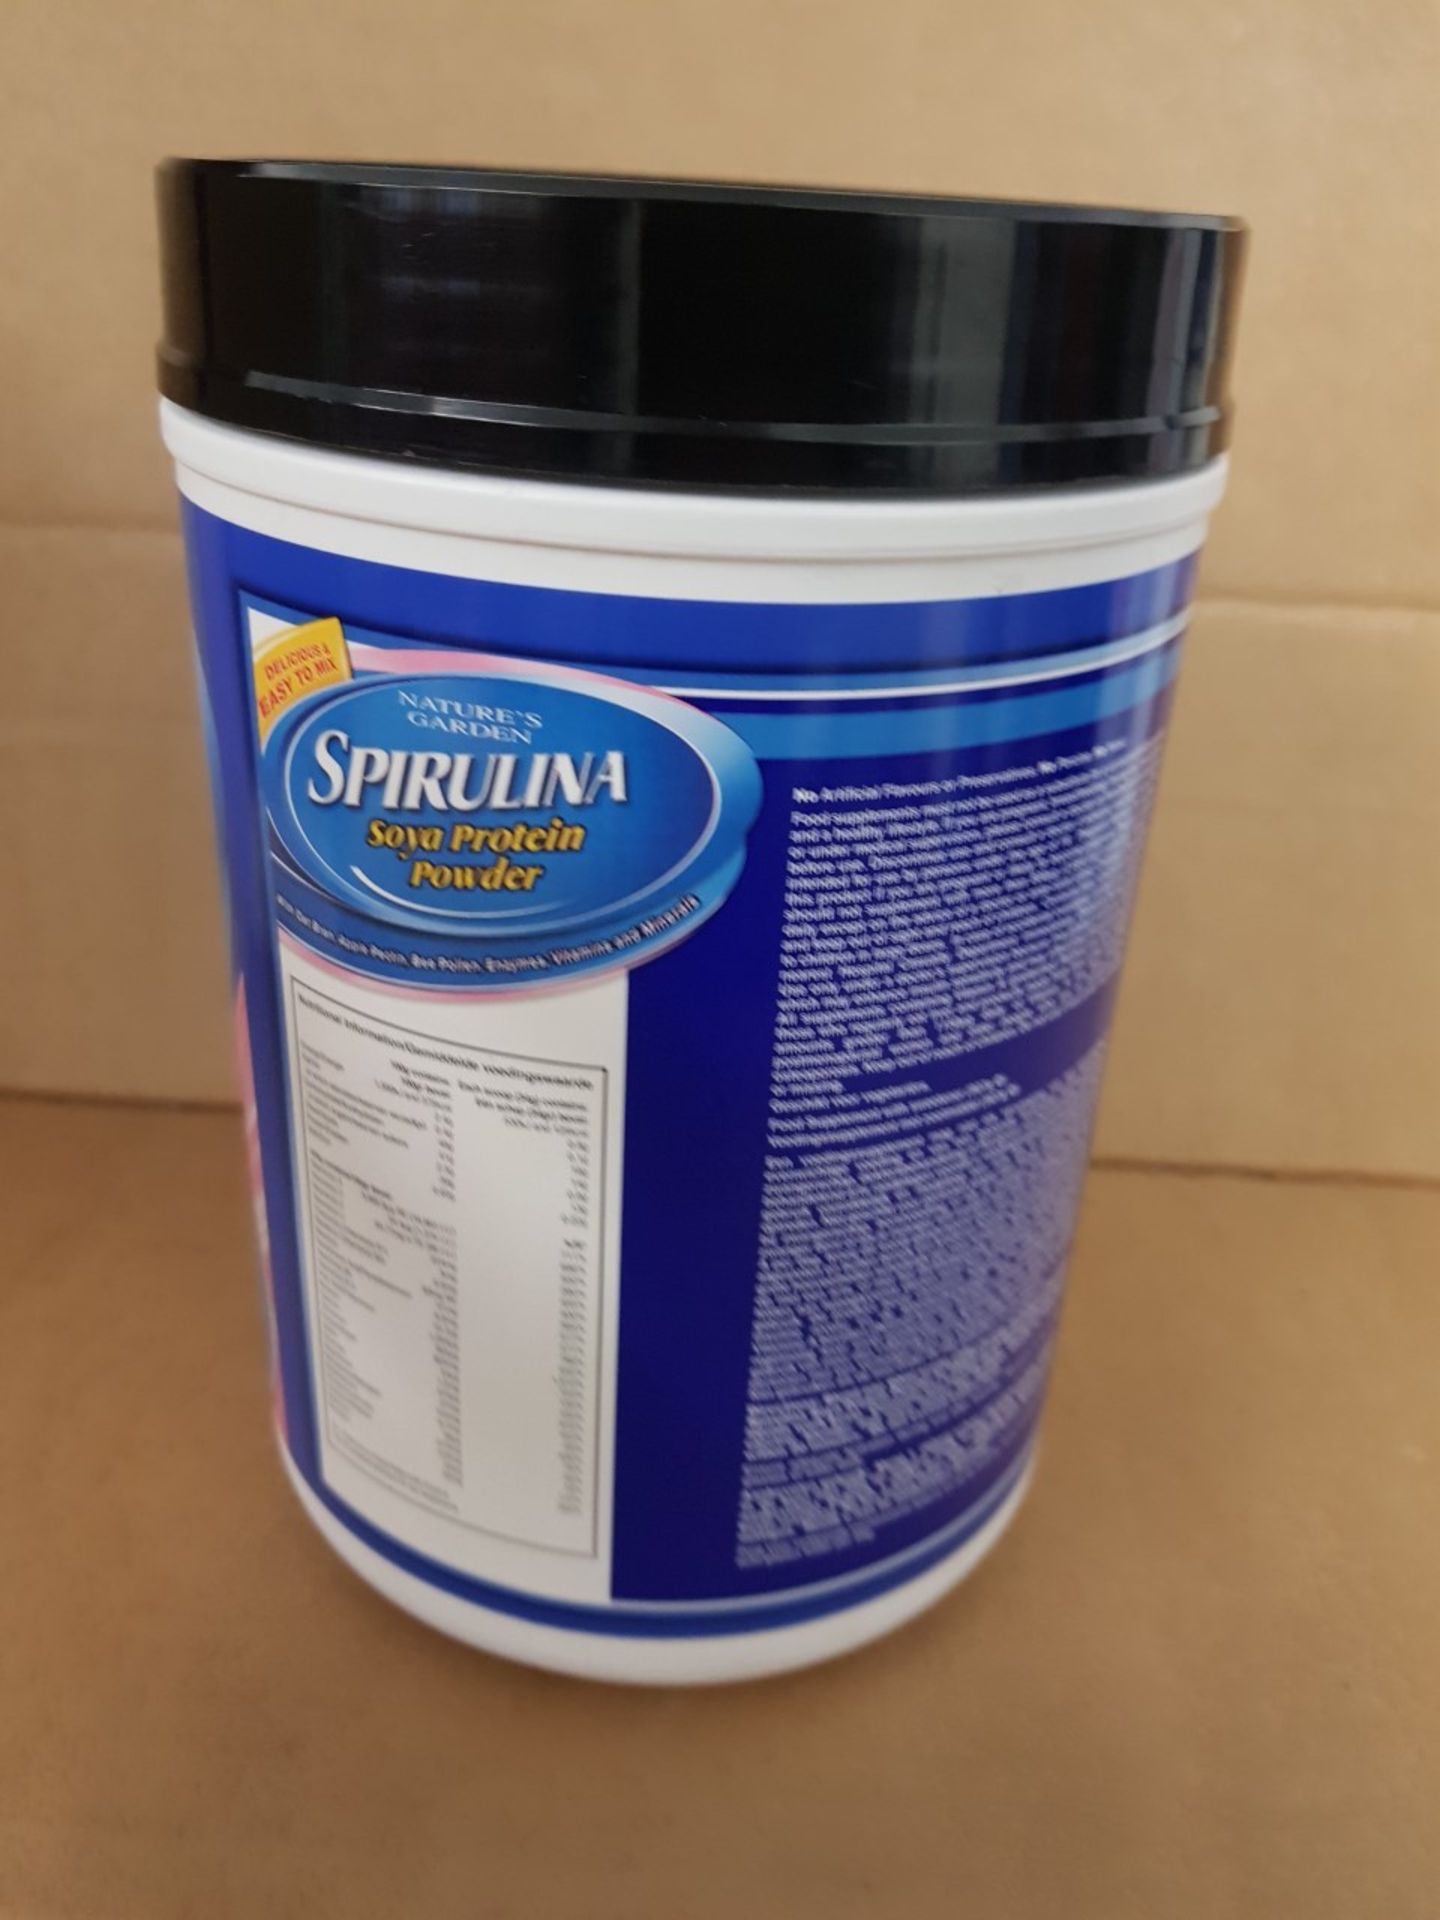 PALLET OF 80 x NEW & SEALED 907G Tubs of Nature's Garden Spirulina - Soya Protein Powder. Makes - Image 7 of 10